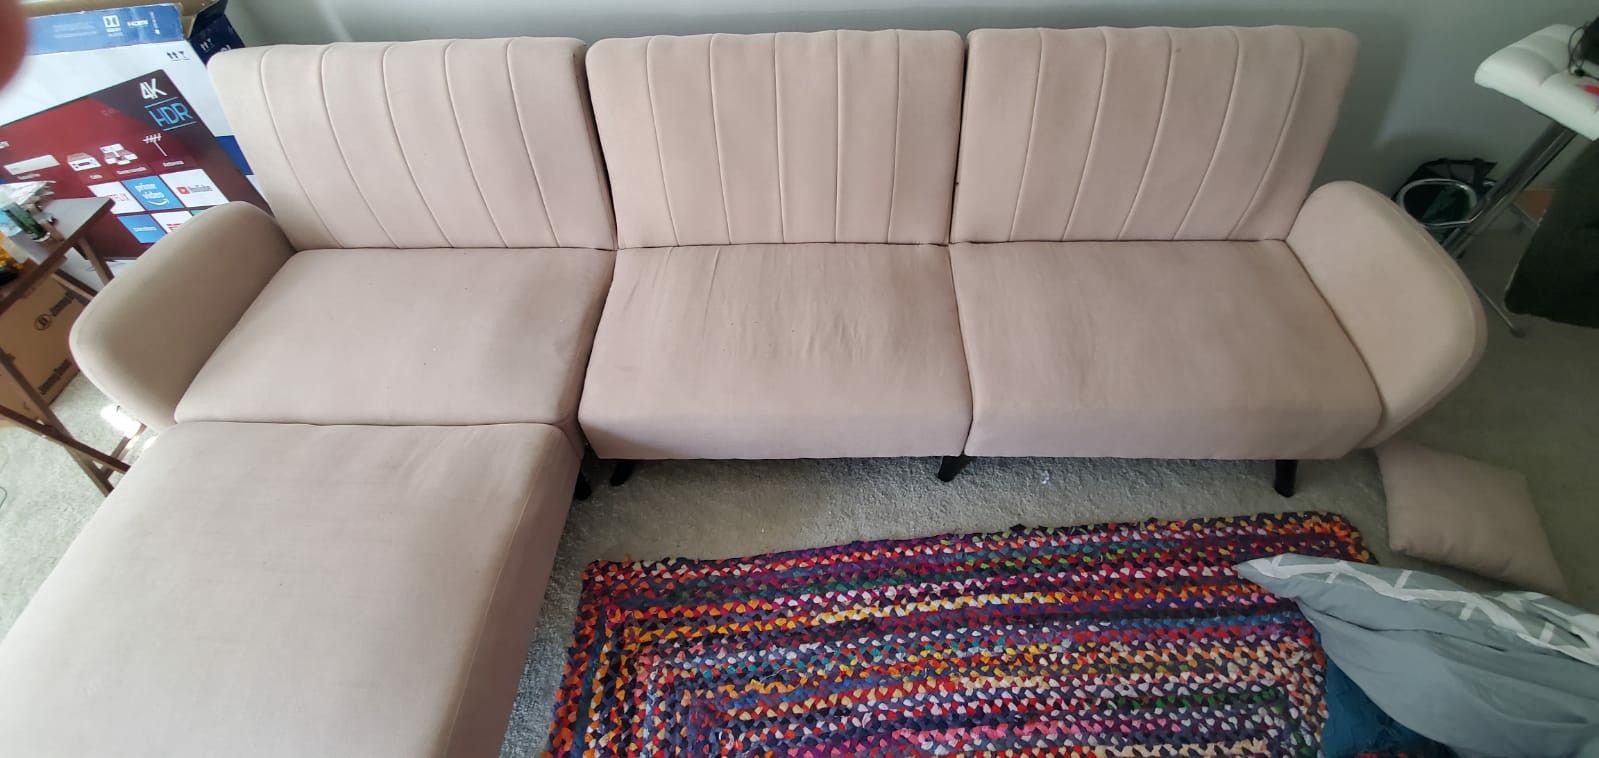 $150 - SOFA BED & TV STAND